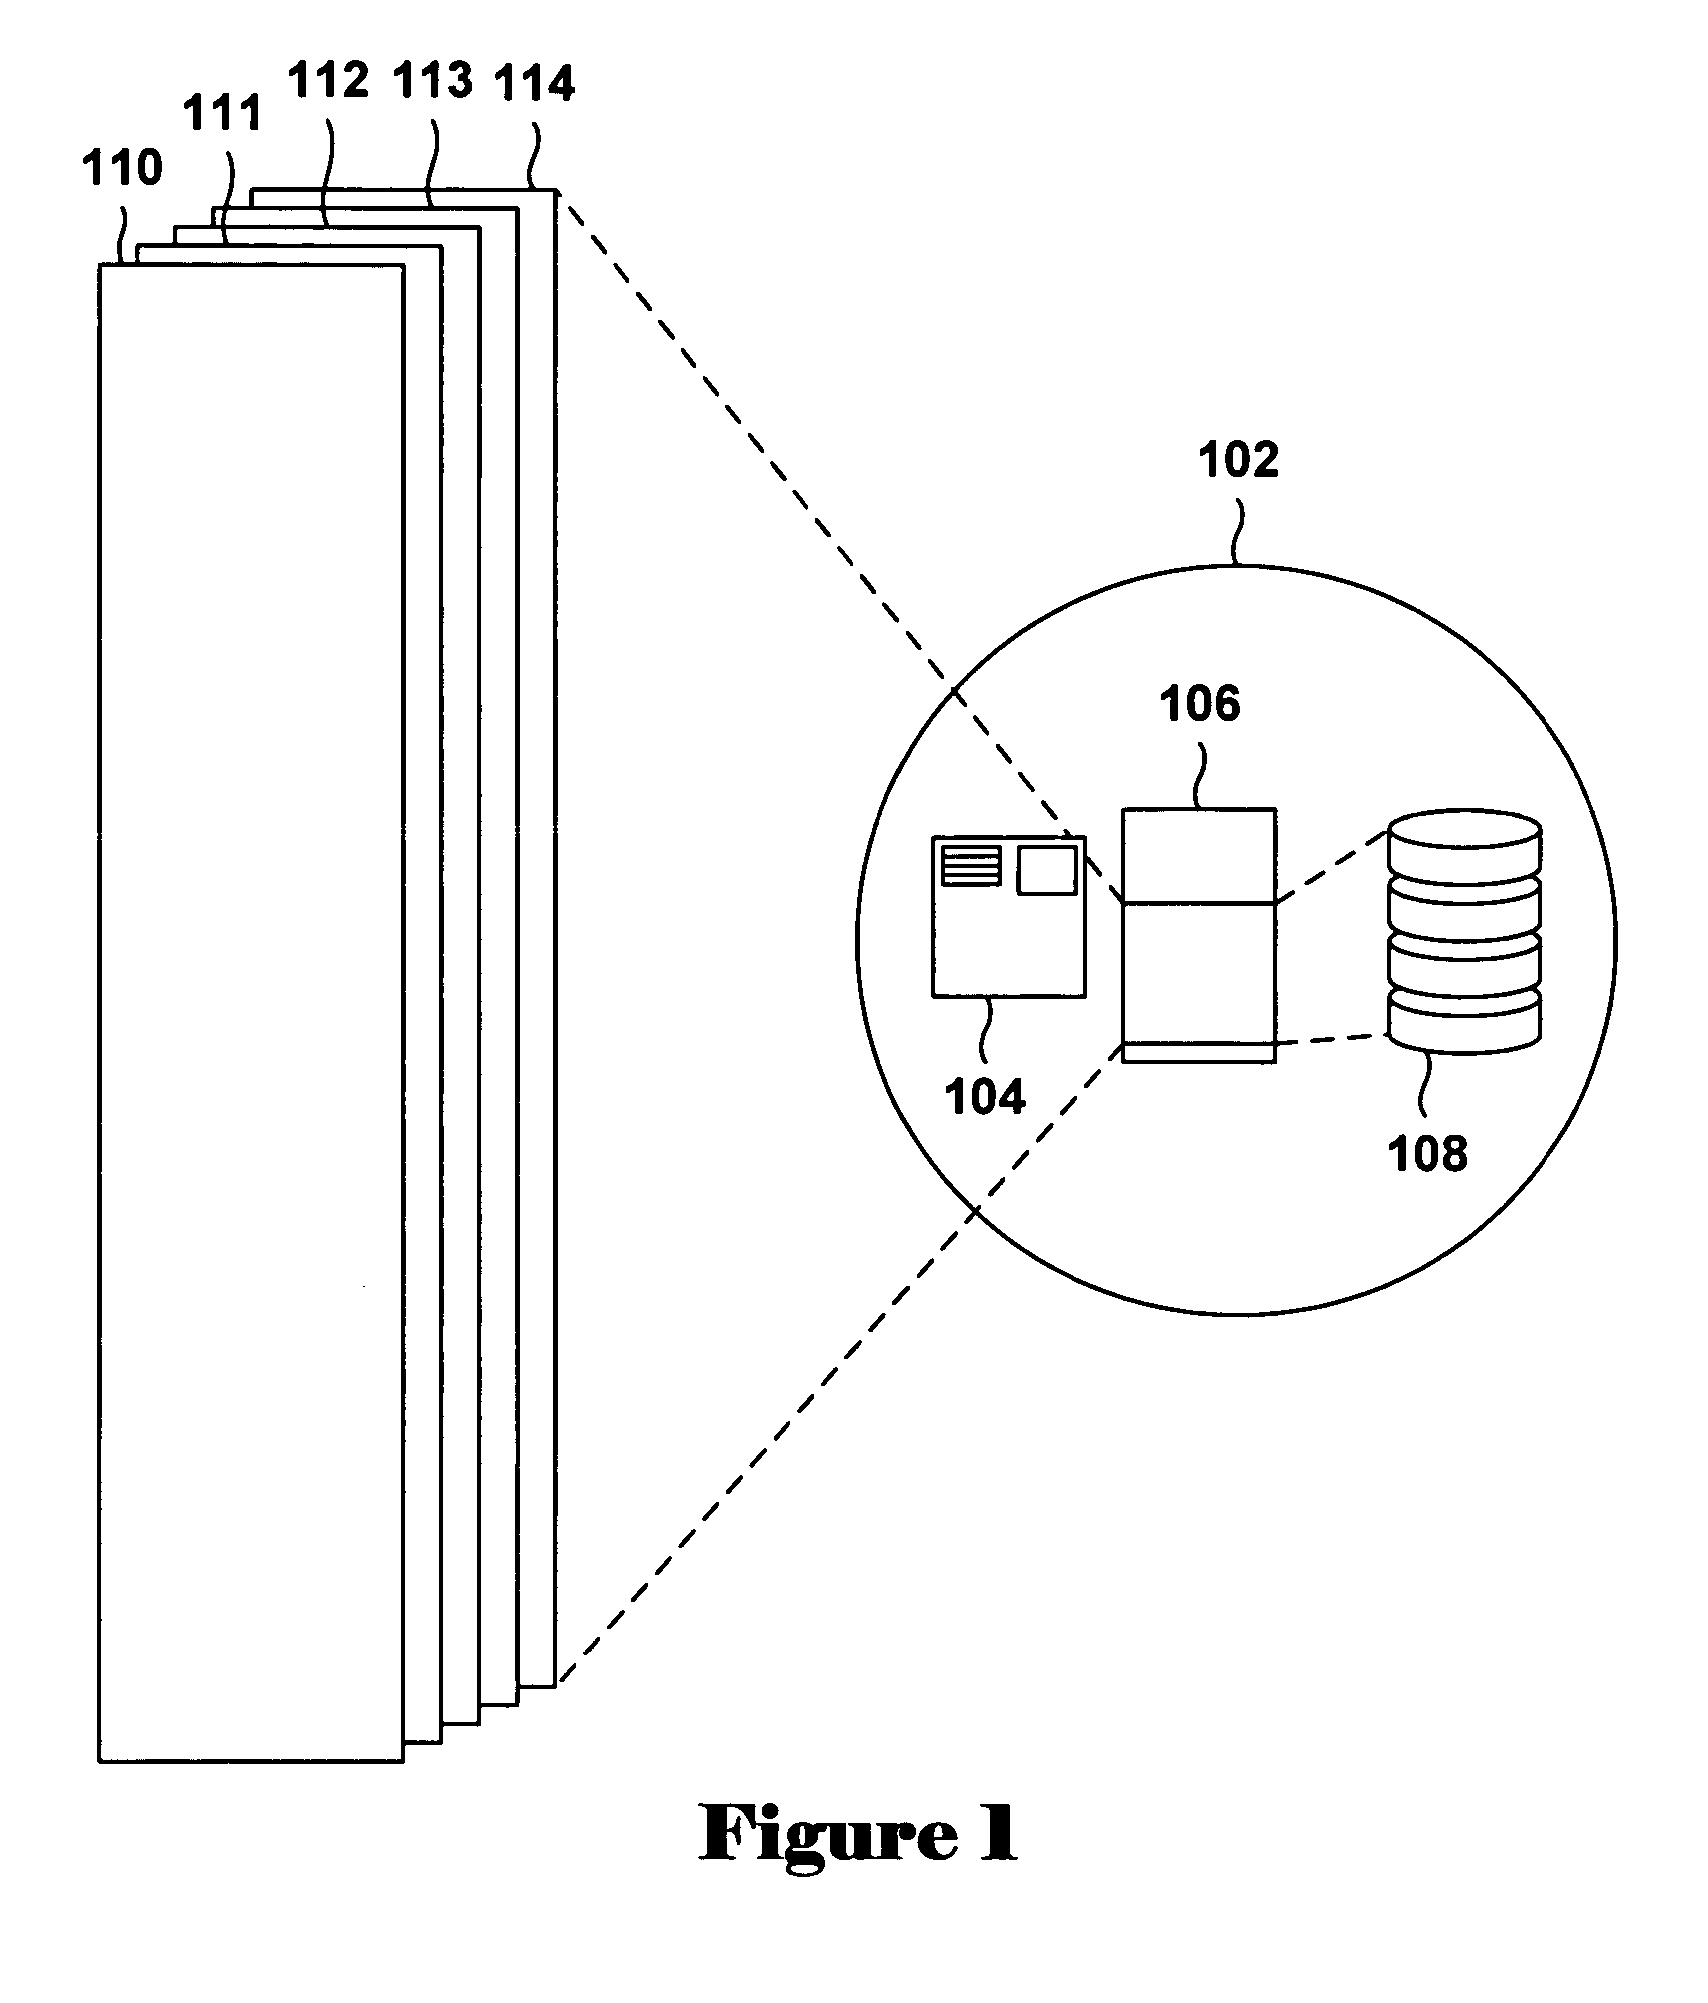 Method for monitoring access to virtual memory pages